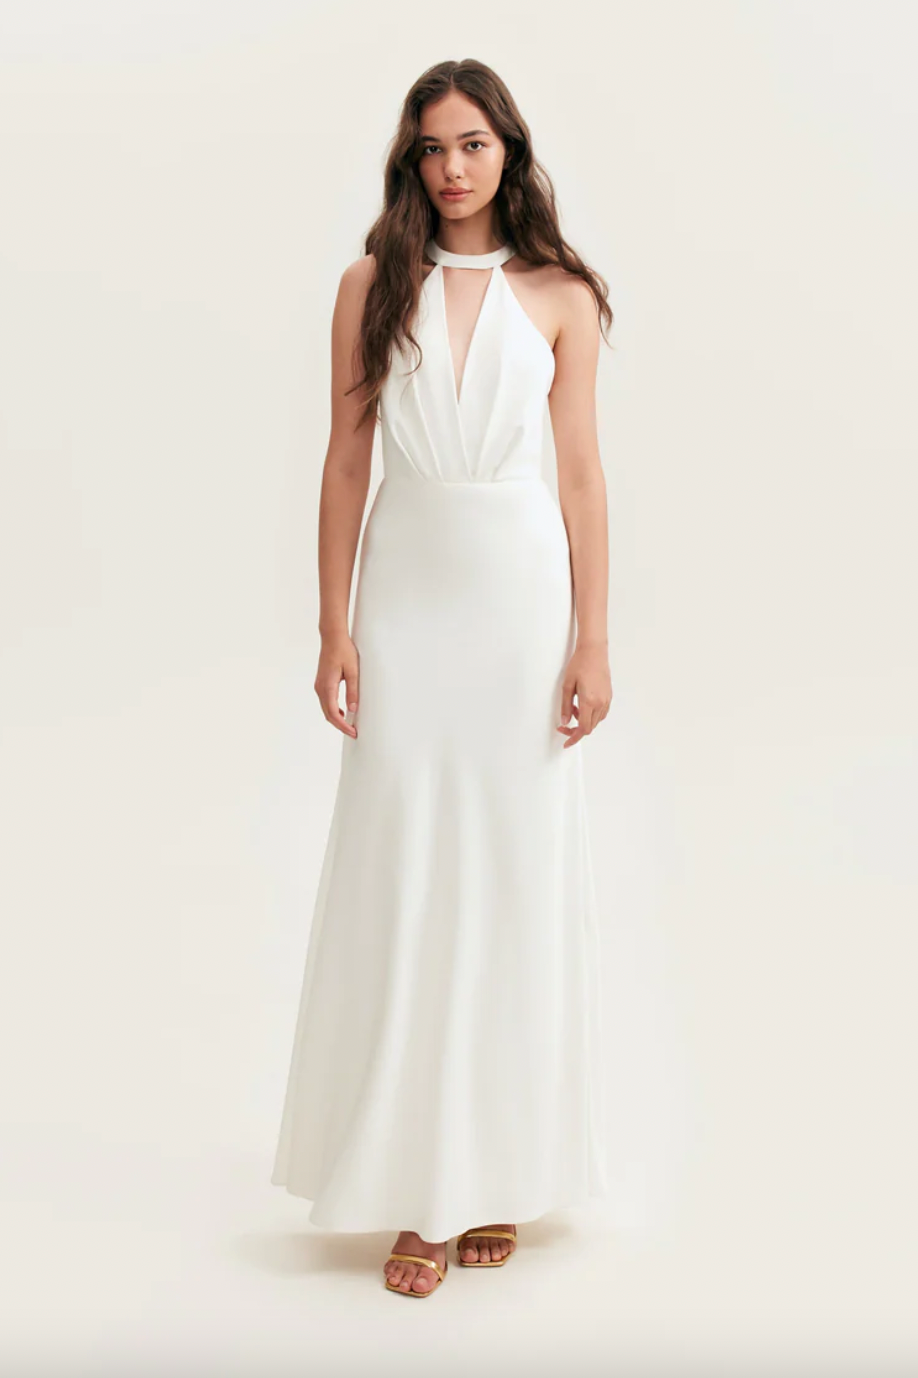 Dadou~Chic: Top 5 White Dresses from Express for This Summer Under